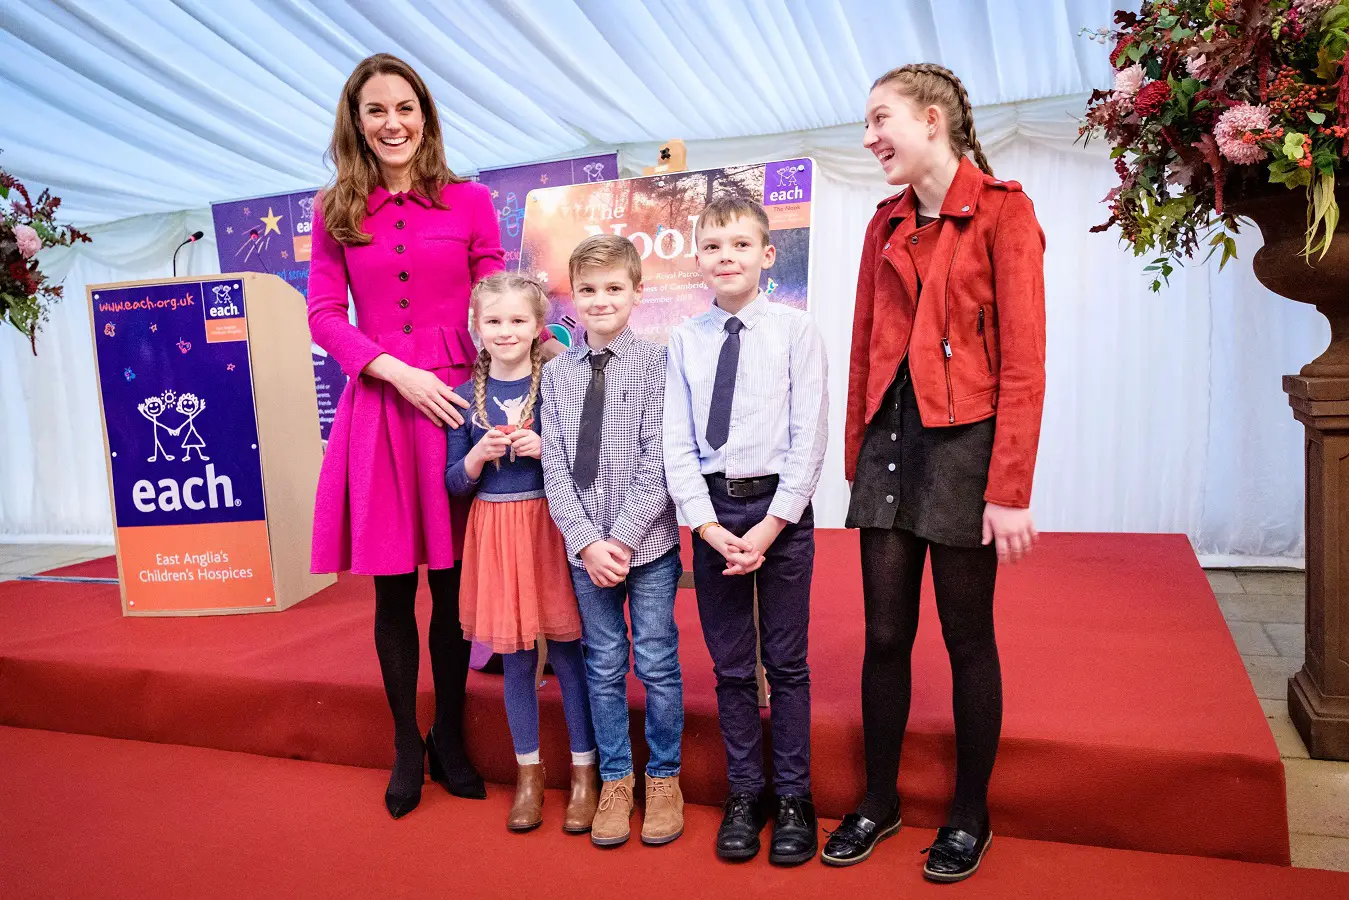 The The Duchess of Cambridge officially opened the EACH facility The Nook